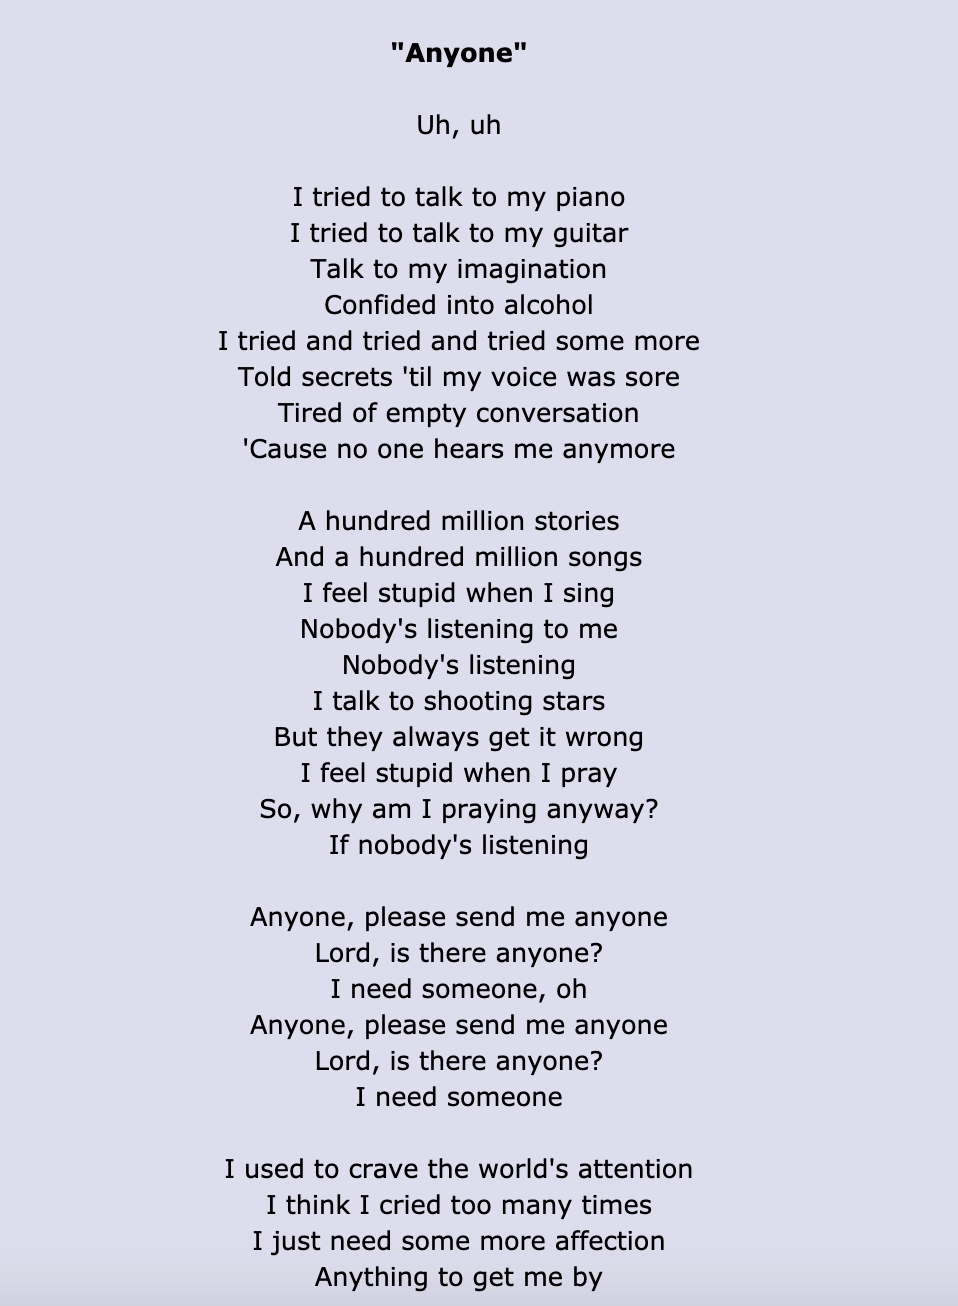 &quot;Anyone&quot; lyrics: &quot;A hundred million stories and a hundred million songs/I feel stupid when I sing/Nobody&#x27;s listening to me/Nobody&#x27;s listening/I talk to shooting stars/But they always get it wrong&quot;